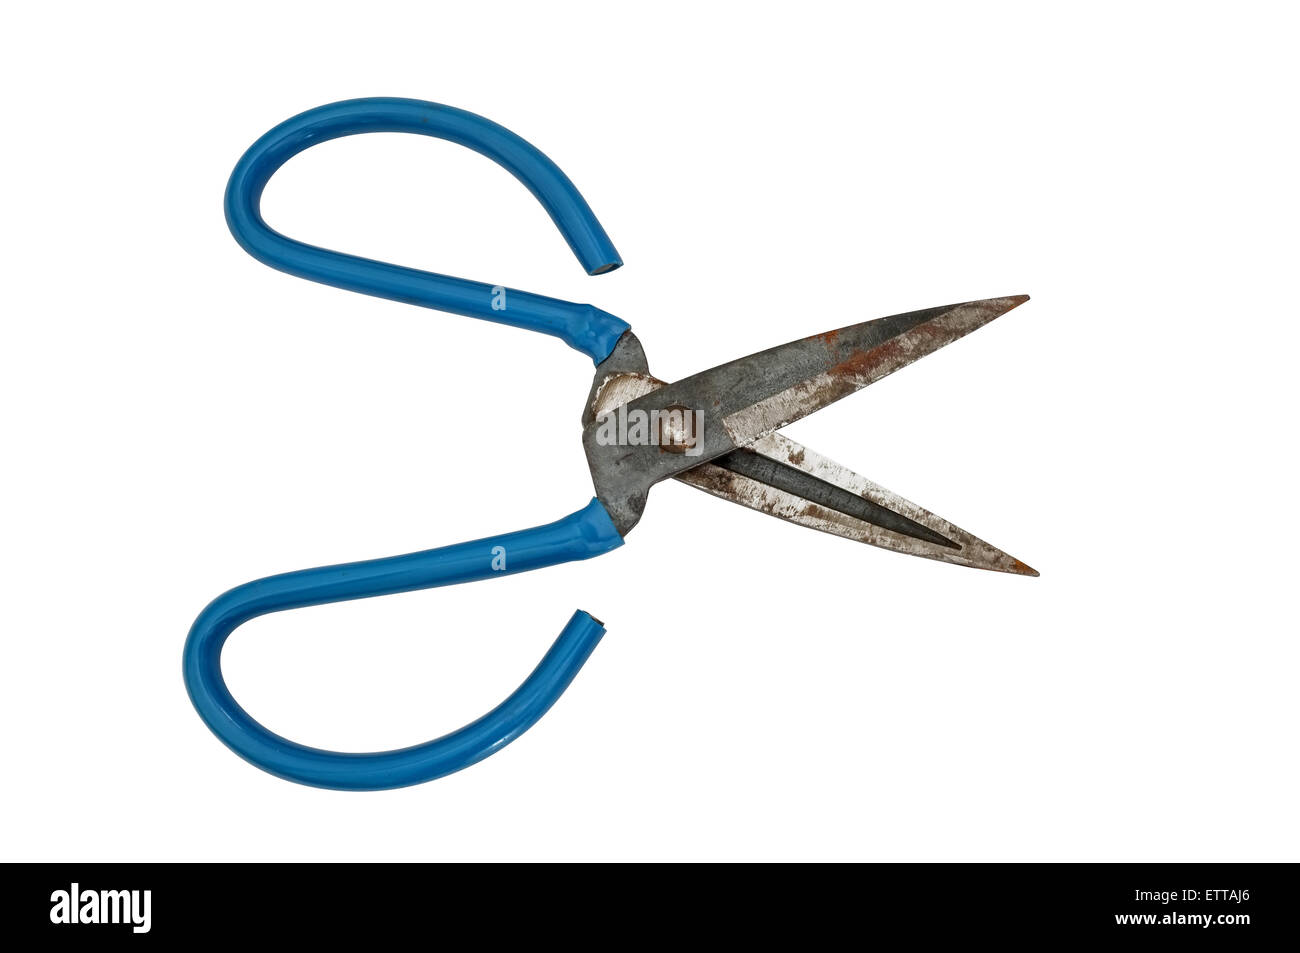 Rusty blue rubber handles scissors isolated on white background Stock Photo